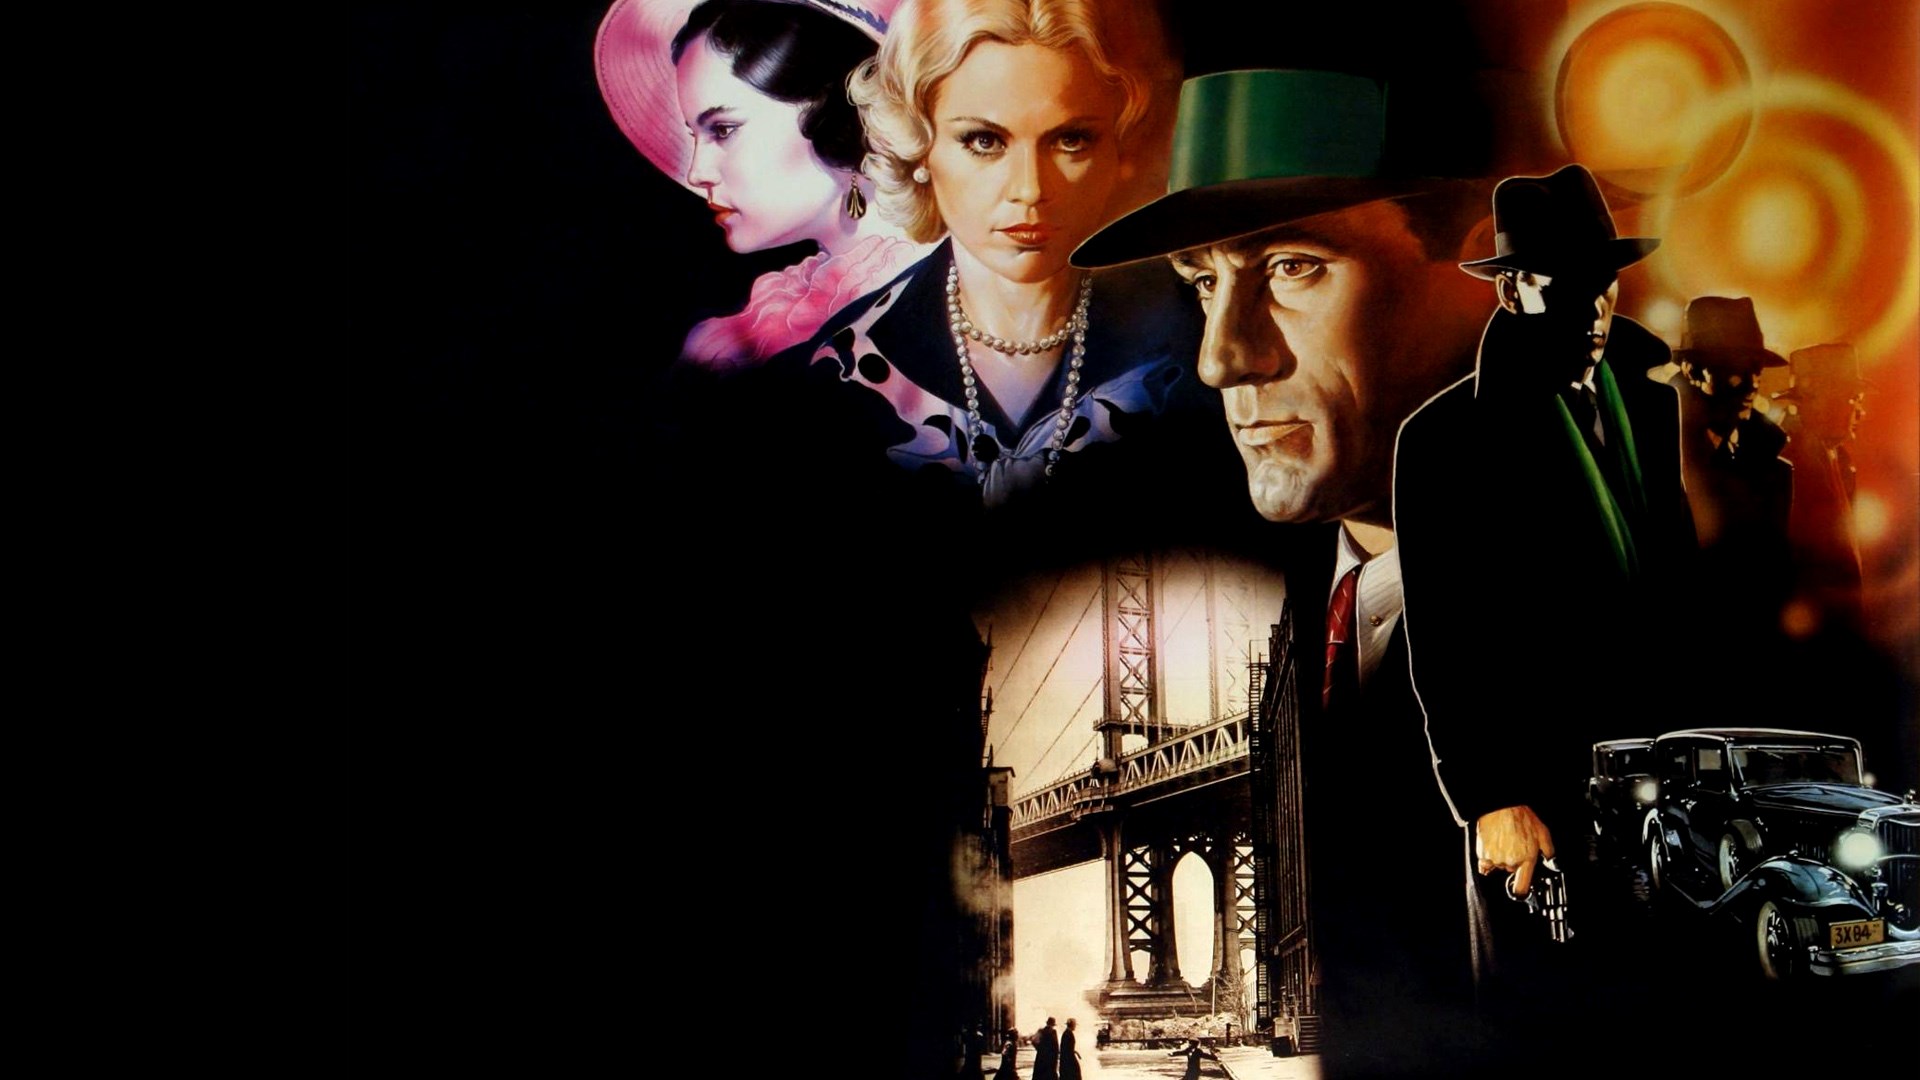 1920x1080 wallpaper images once upon a time in america JPG 215 kB